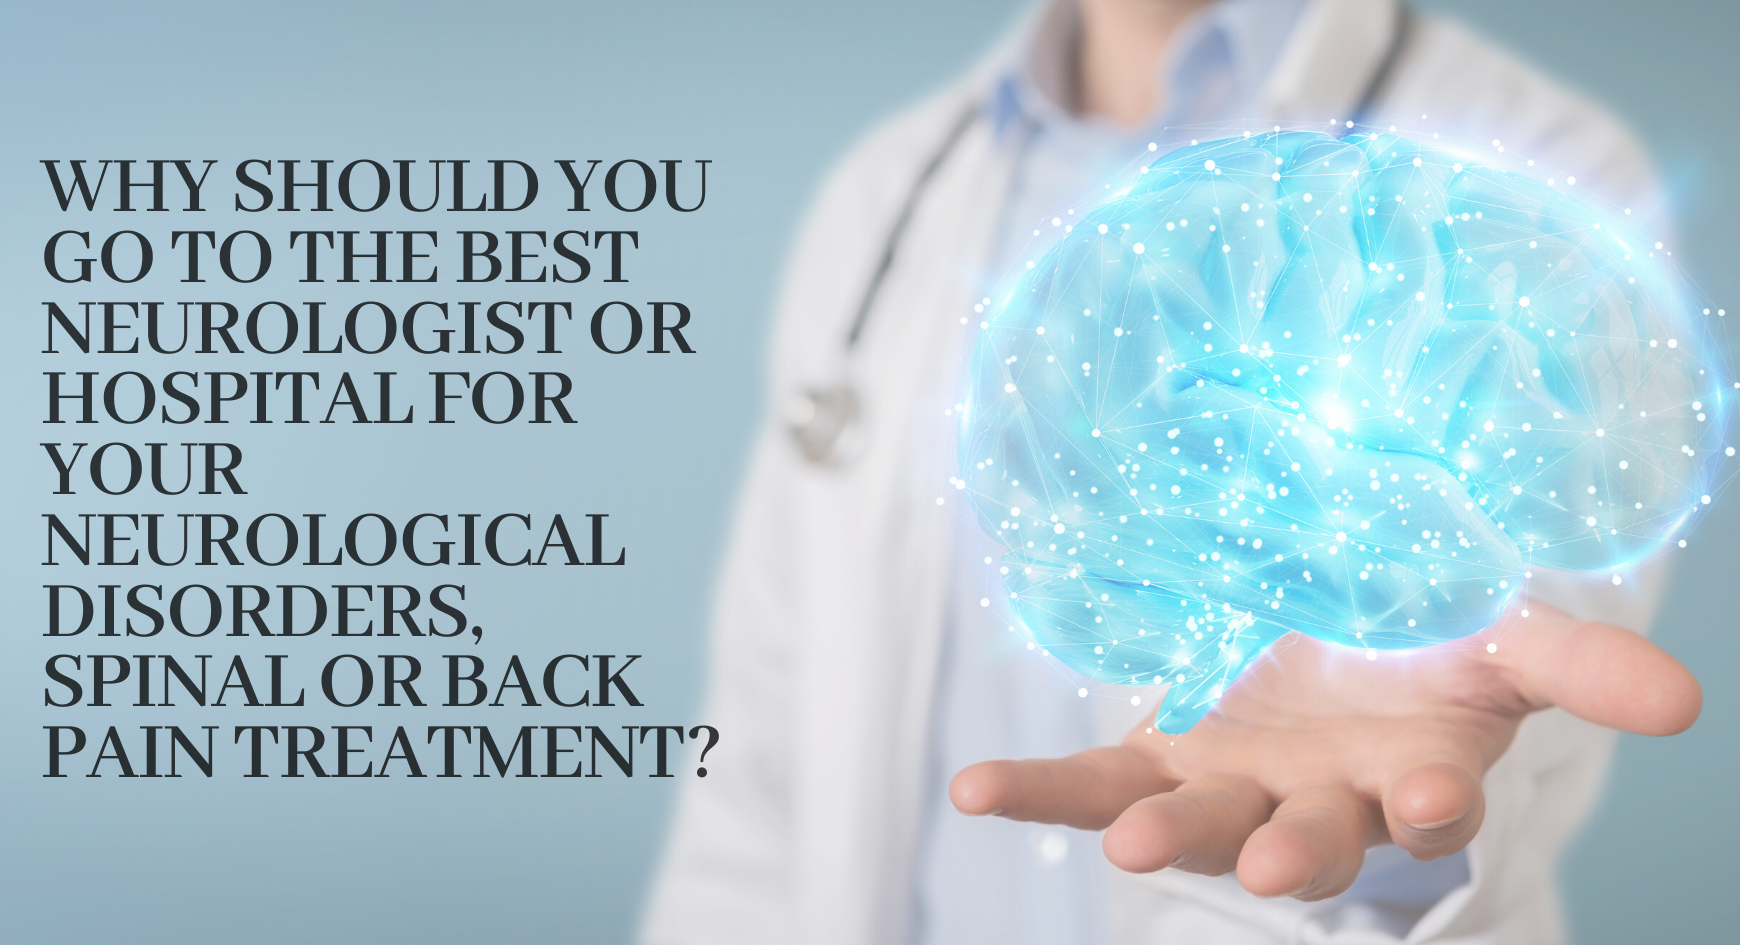 Why should you go to the best neurologist or hospital for your neurological disorders,spinal treatment?